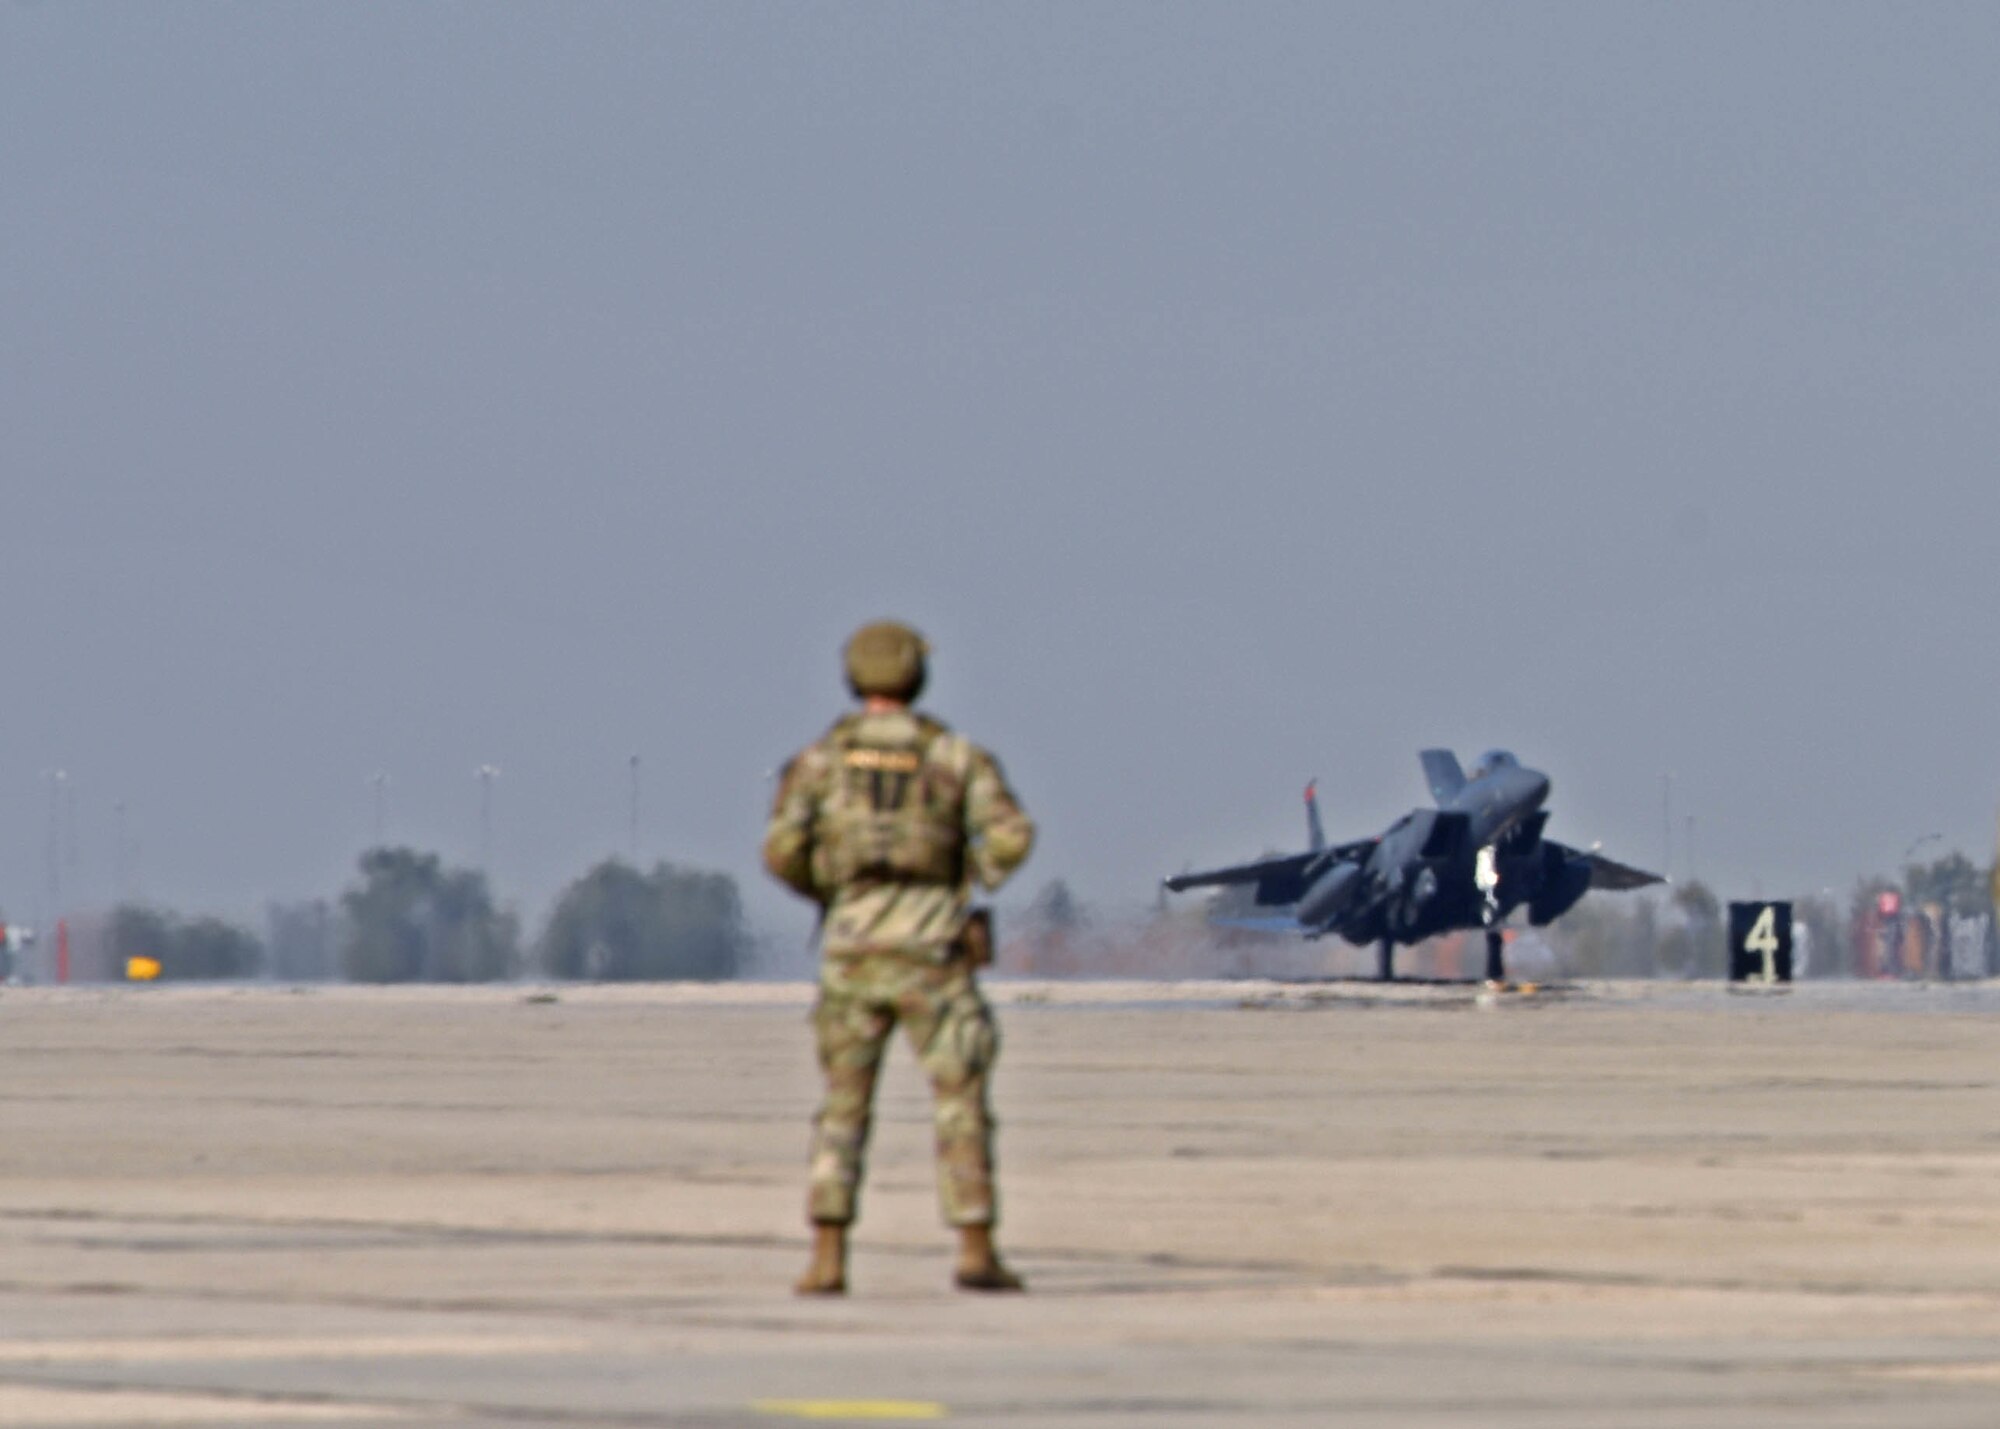 A U.S. Airman with the 366th Security Forces Squadron watches an F-15E Strike Eagle aircraft land for special refueling operations at Gowen Field, Boise, Idaho, Oct. 20, 2022. Special fueling operations were conducted by the 62d Airlift Wing’s C-17 Globemaster III aircraft and the 366th Fighter Wing’s F-15 as part of Exercise Rainier War 22B. (U.S. Air Force photo by Staff Sgt. Zoe Thacker)